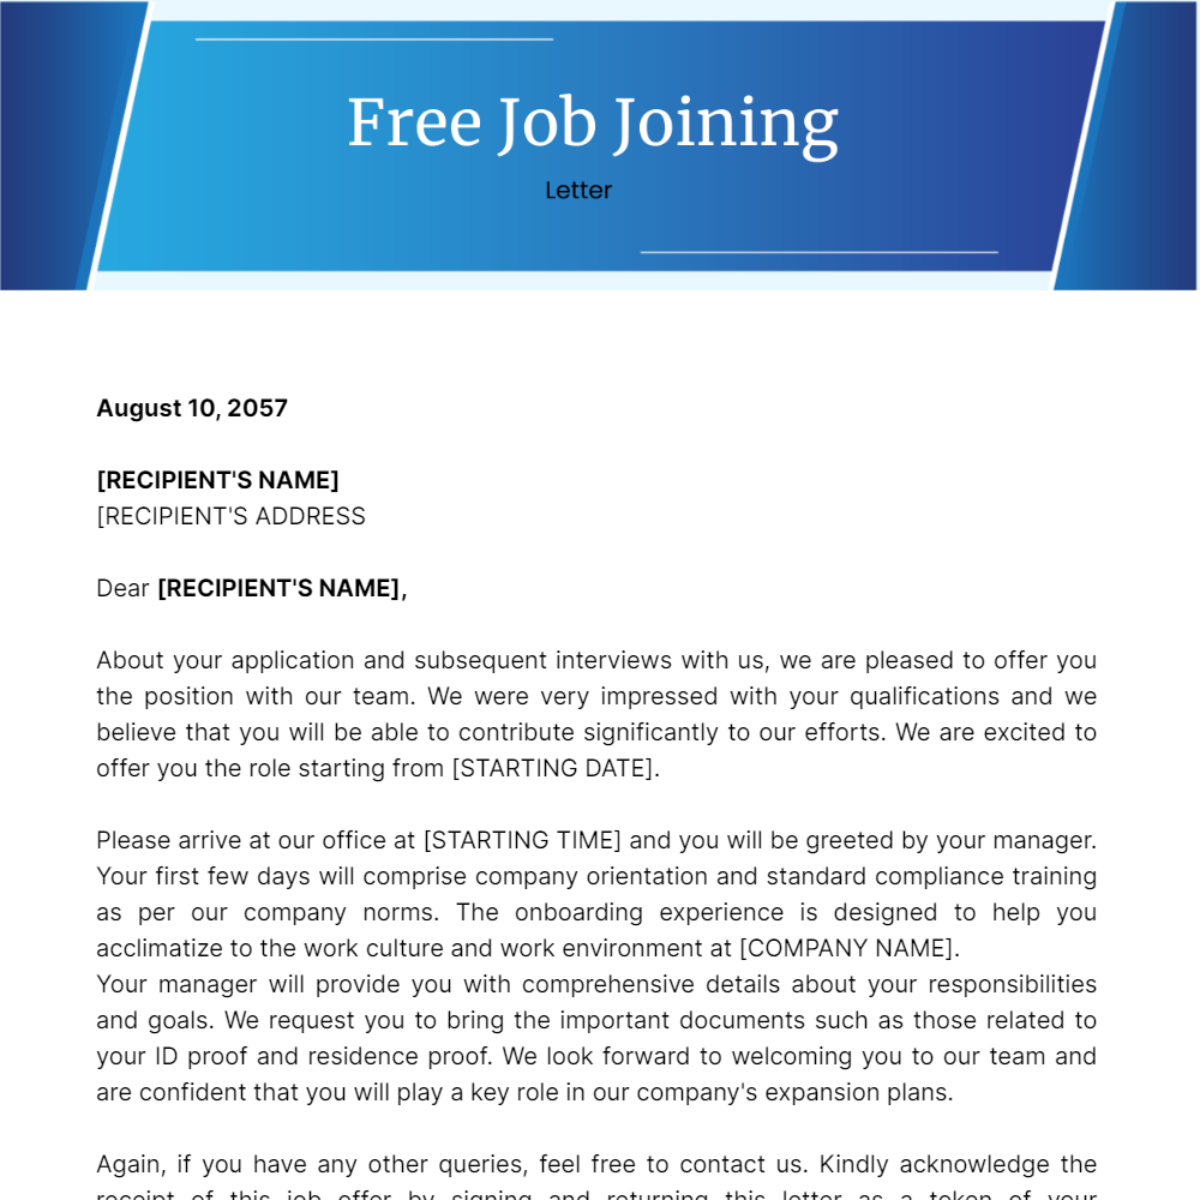 Job Joining Letter Template